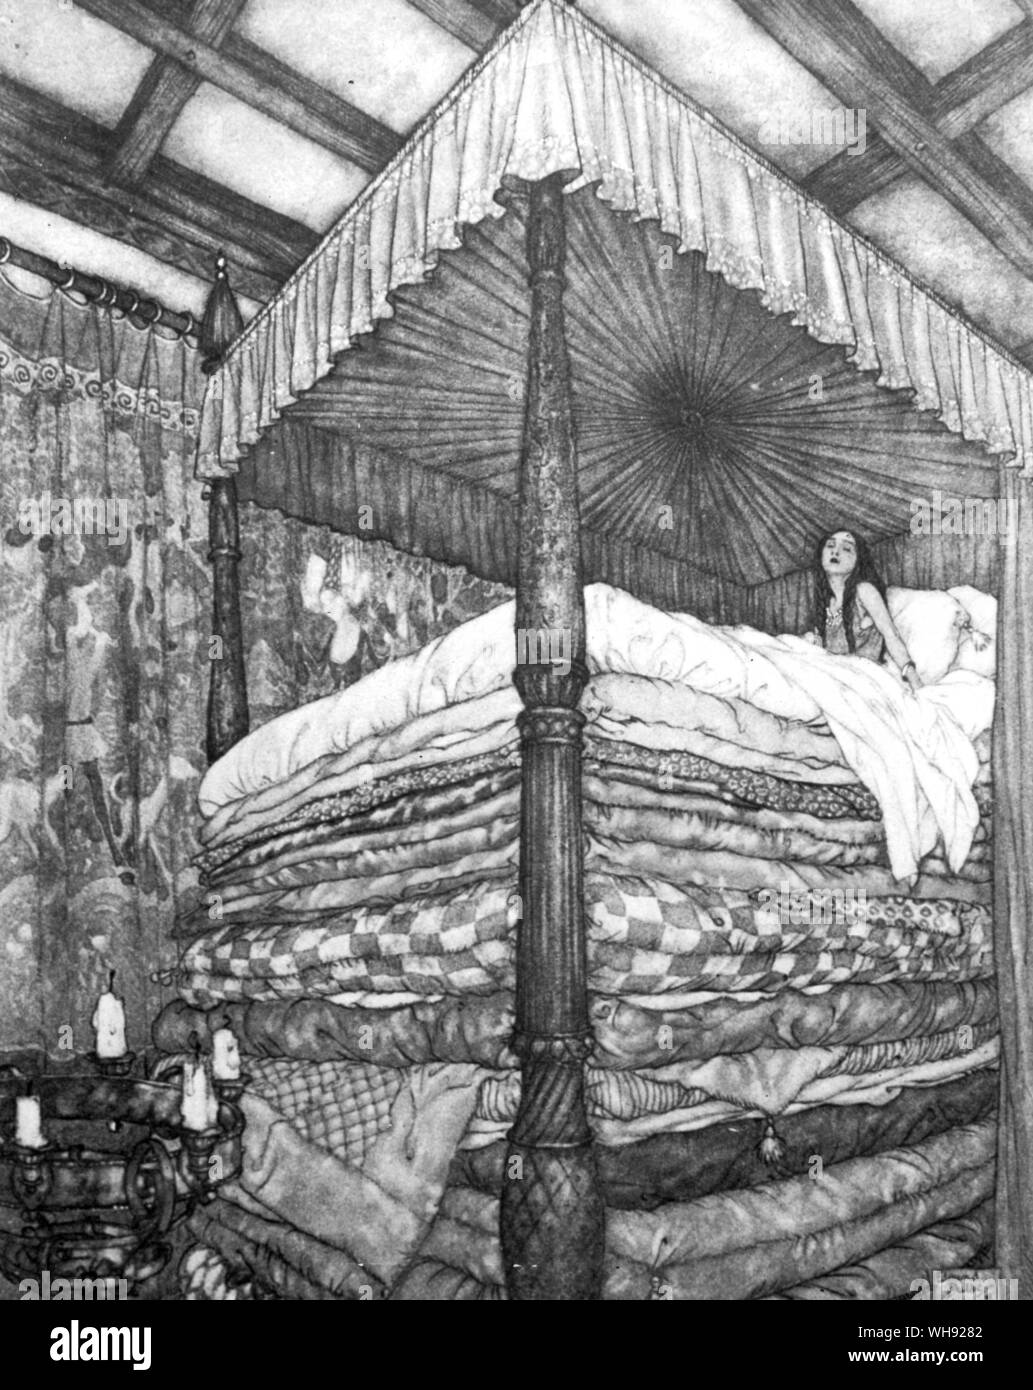 The Princess and the Pea by Edmund Dulac, 1911. Stock Photo